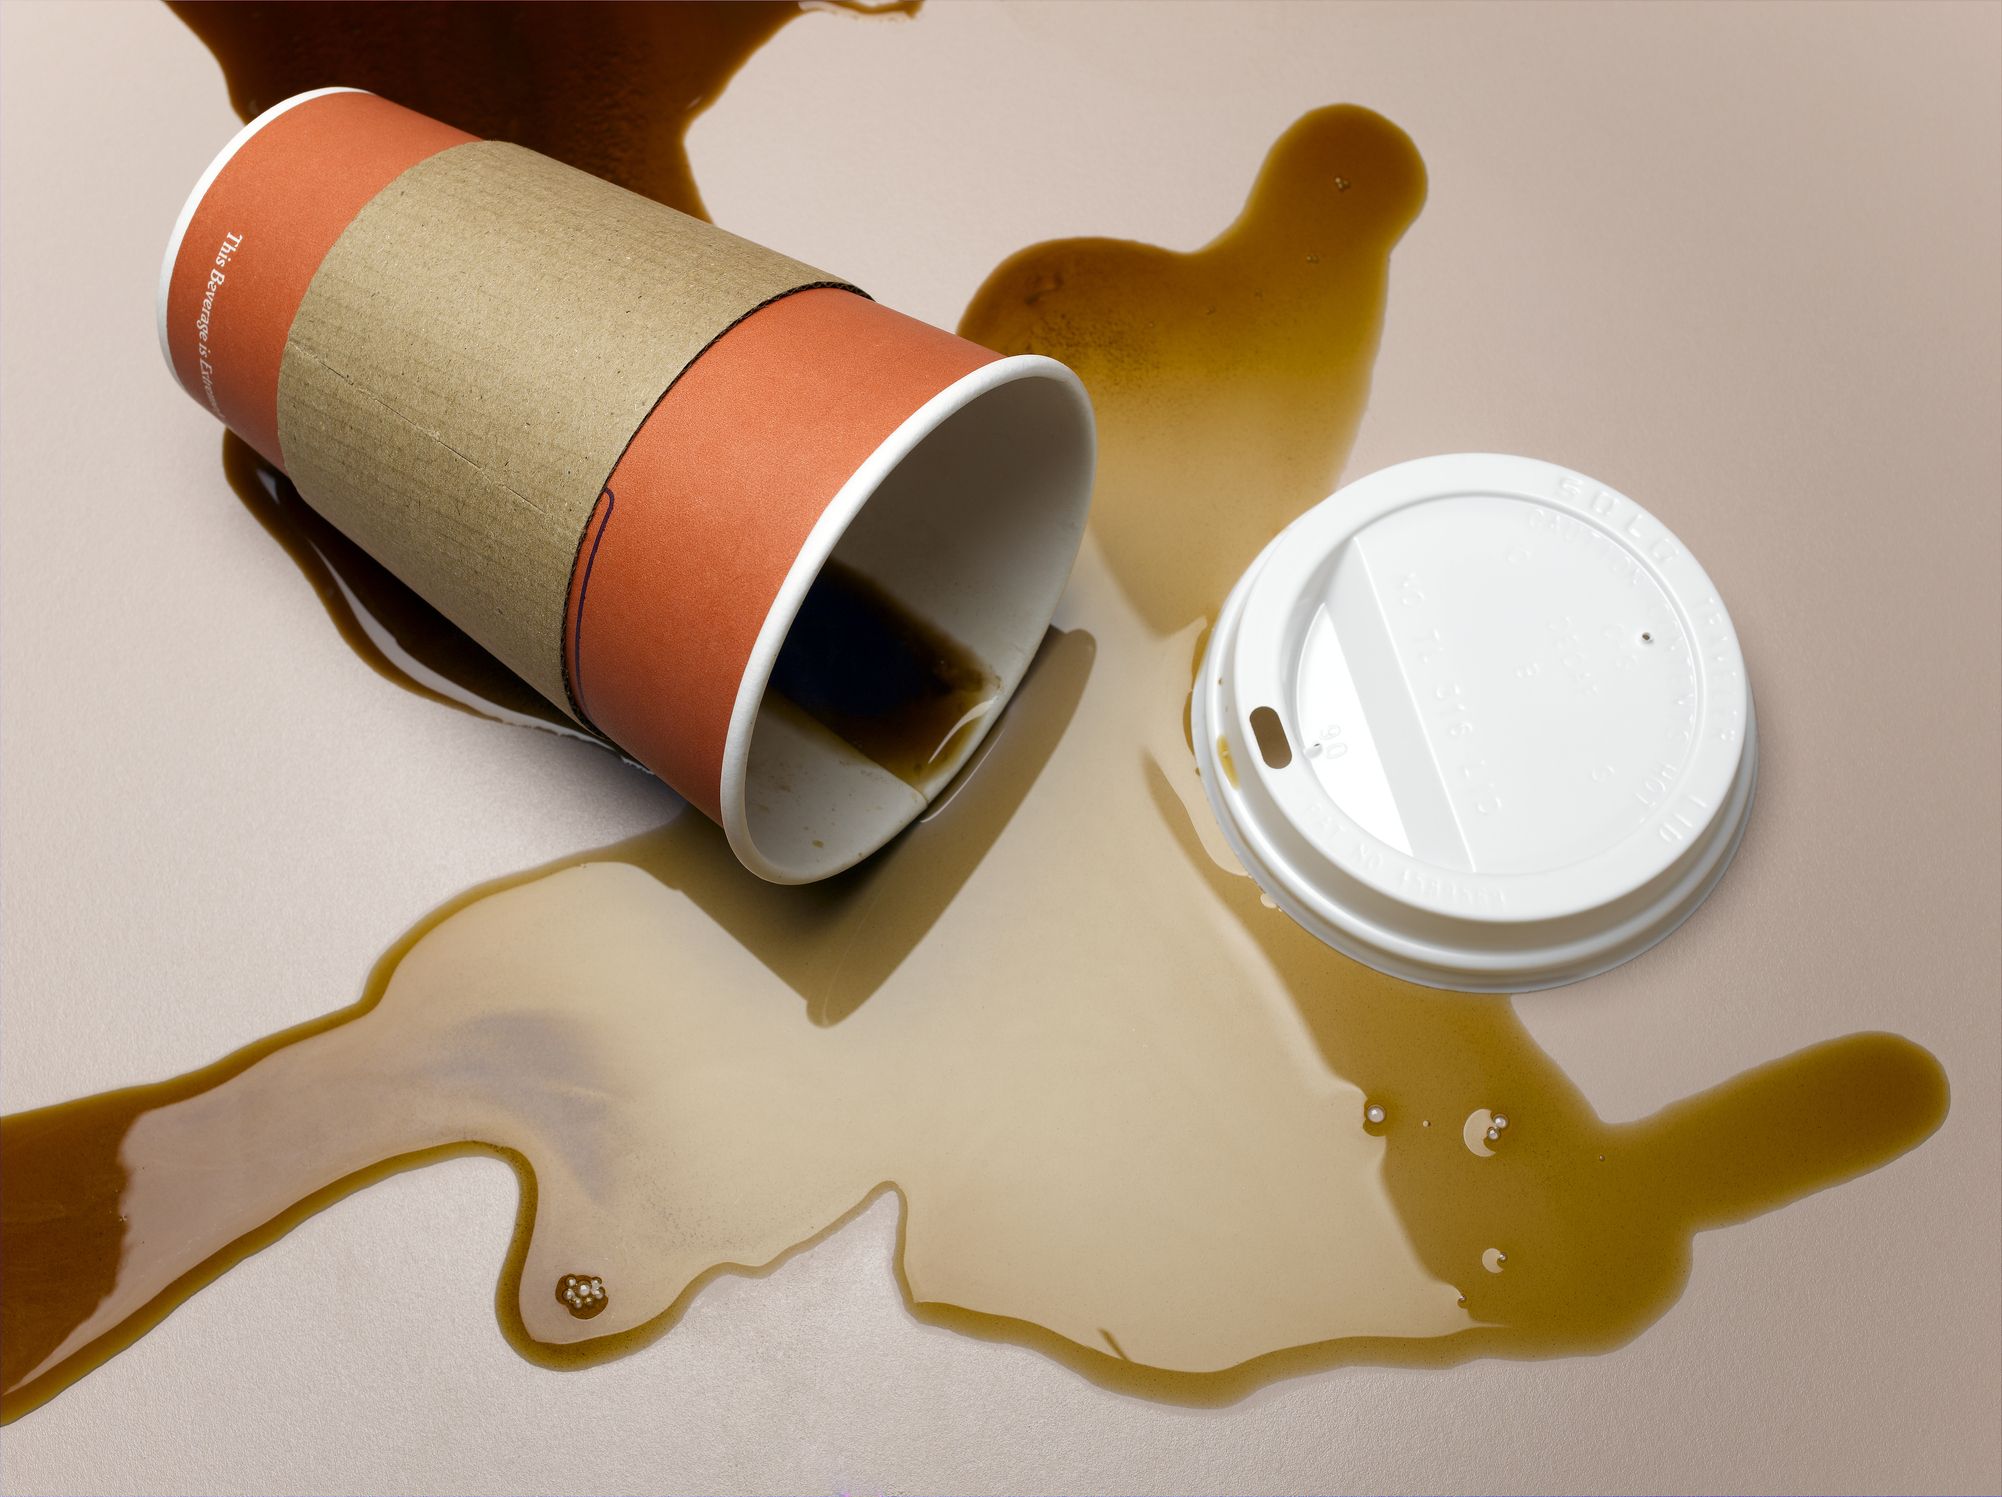 https://hips.hearstapps.com/hmg-prod/images/vending-cup-on-side-spilling-coffee-onto-surface-royalty-free-image-1651507034.jpg